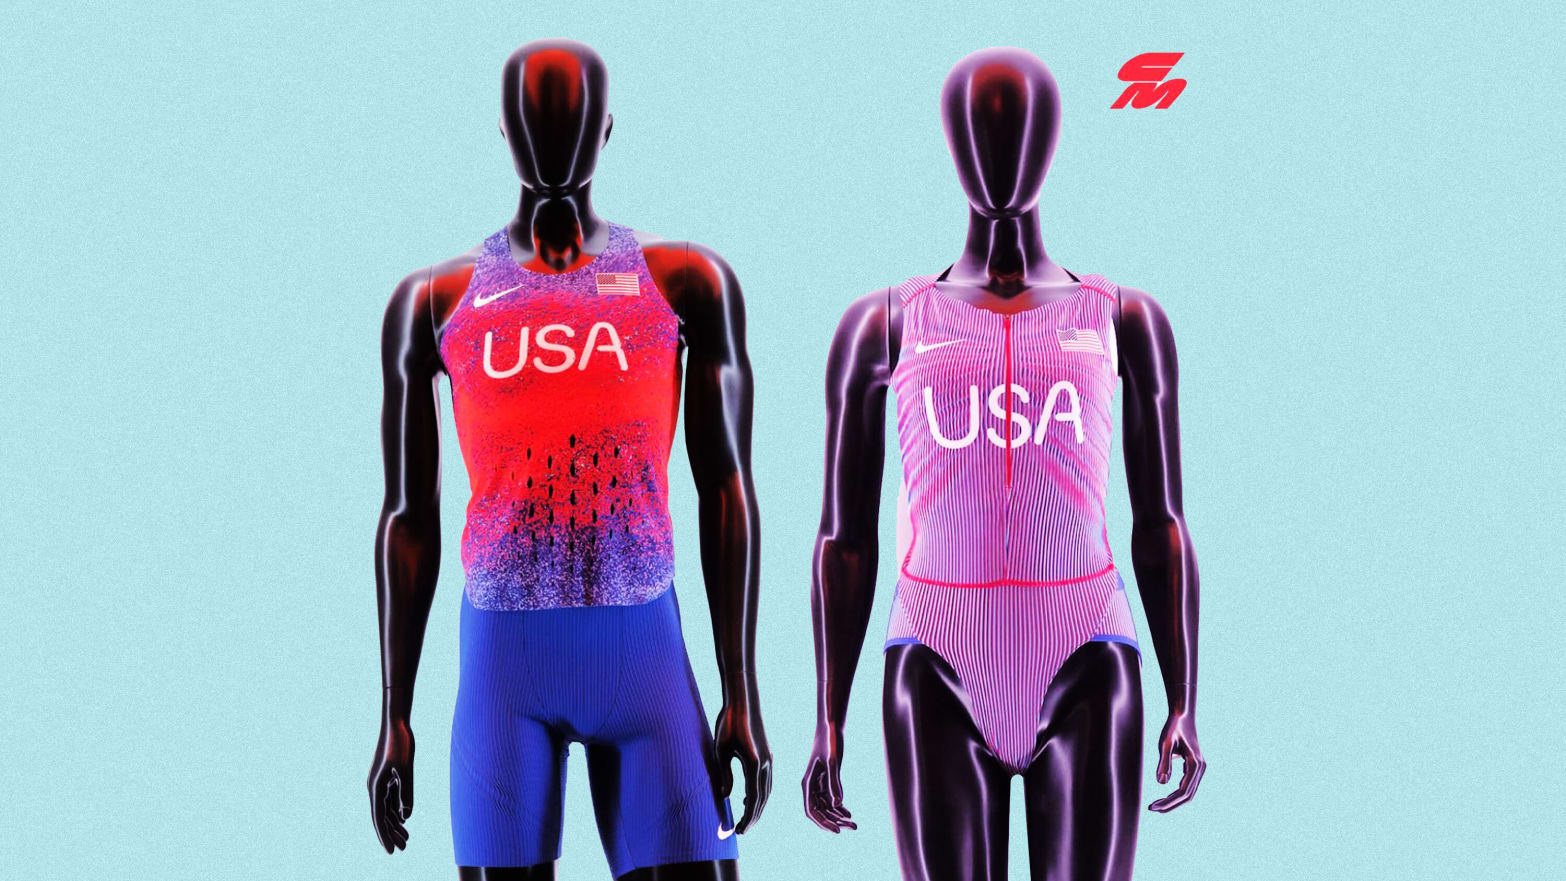 Nike Ripped for Risqué Women’s Track Olympic Uniforms